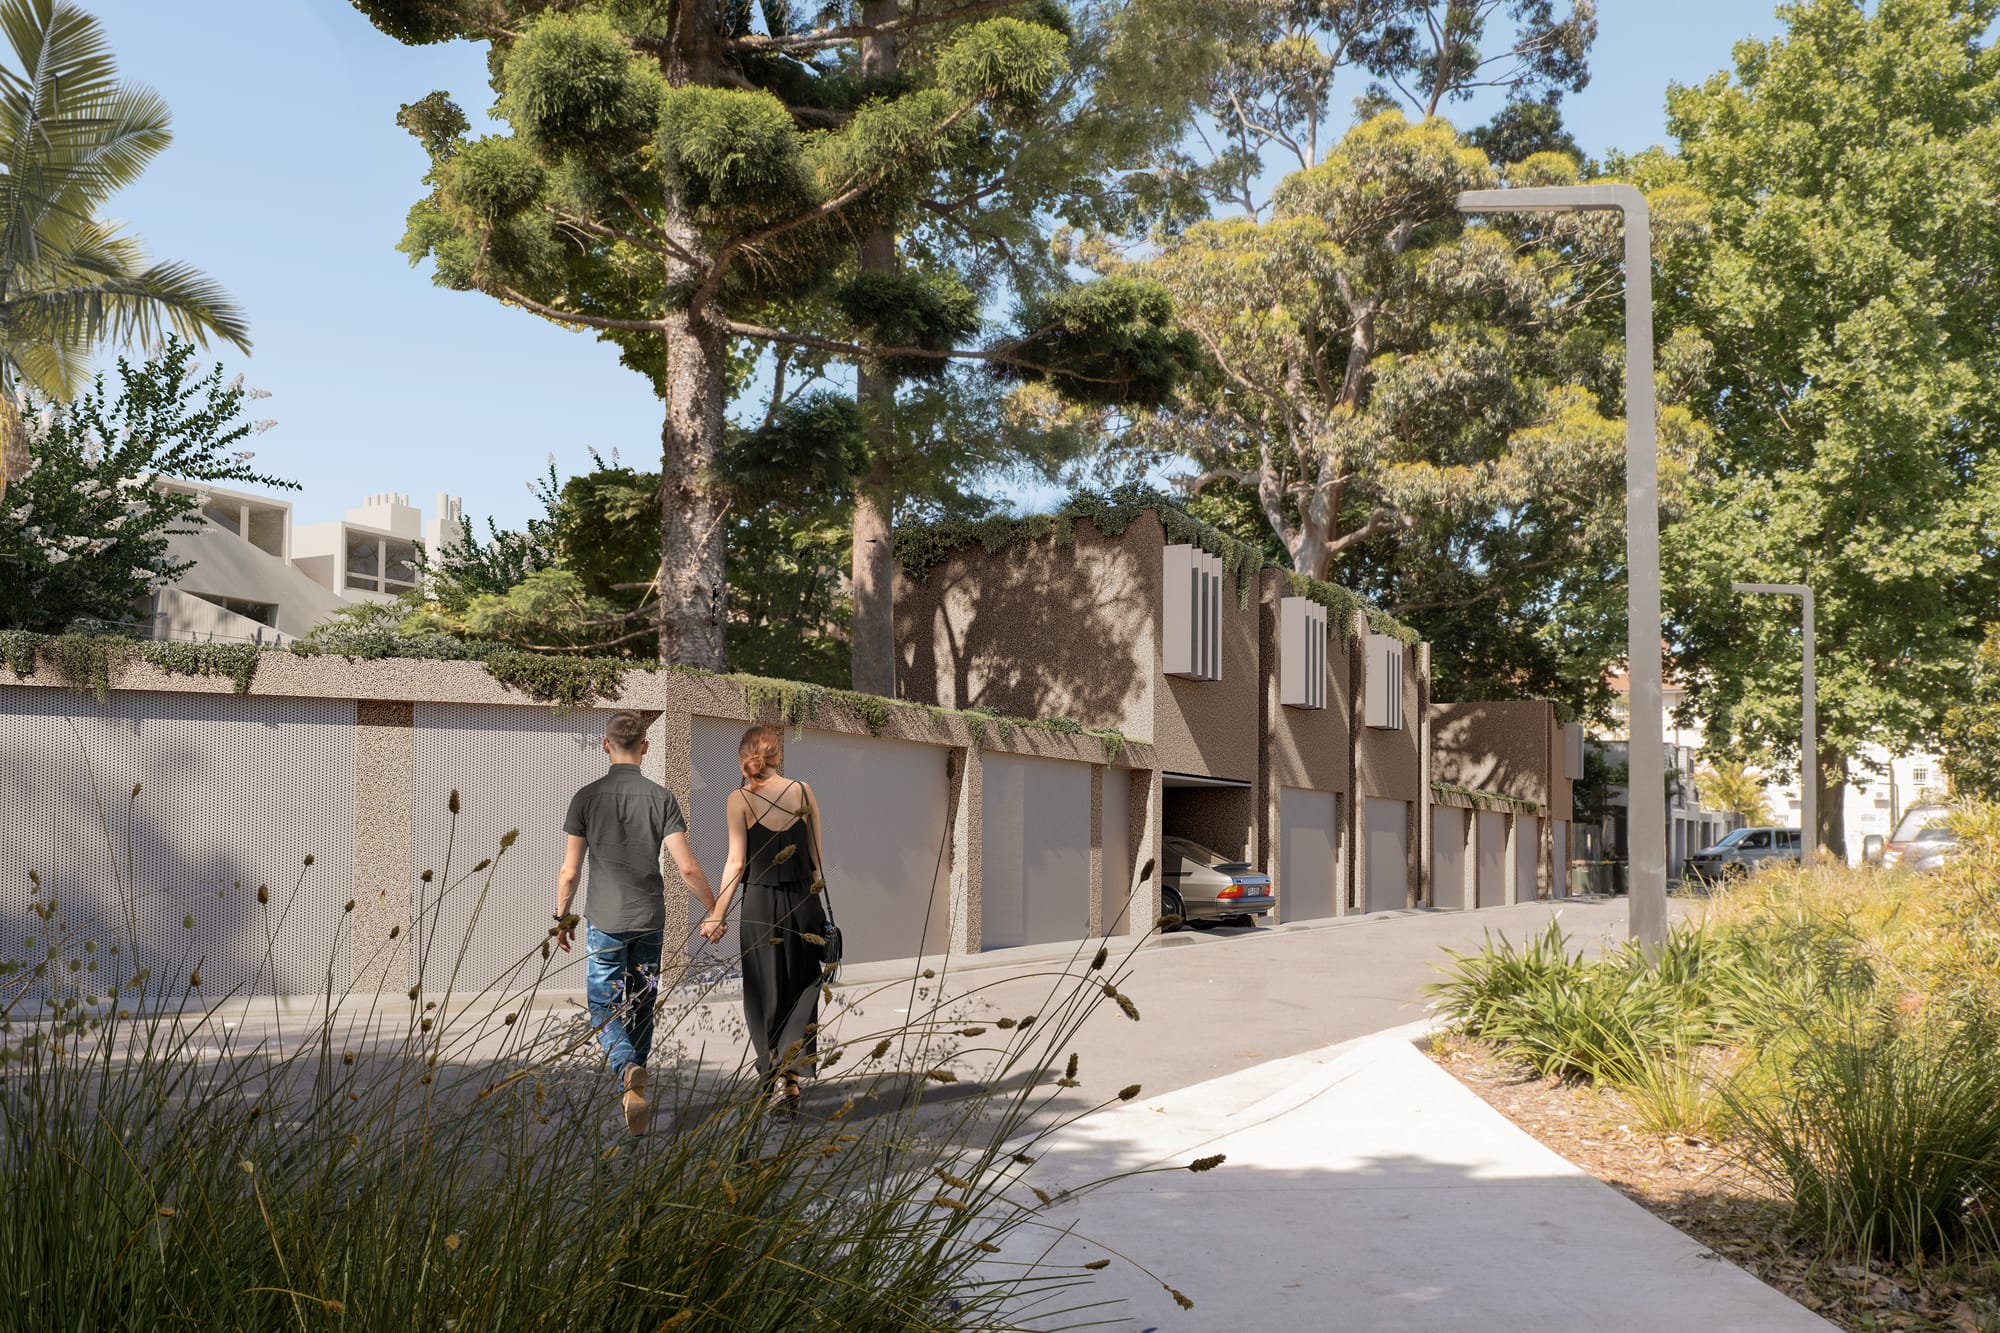 Nobbs Lane by Studio Shand. Imagery by Dan Layden. Couple walking along footpath inbetween tall trees and lush garden beds. Small, contemporary units visible further up the pathway. 